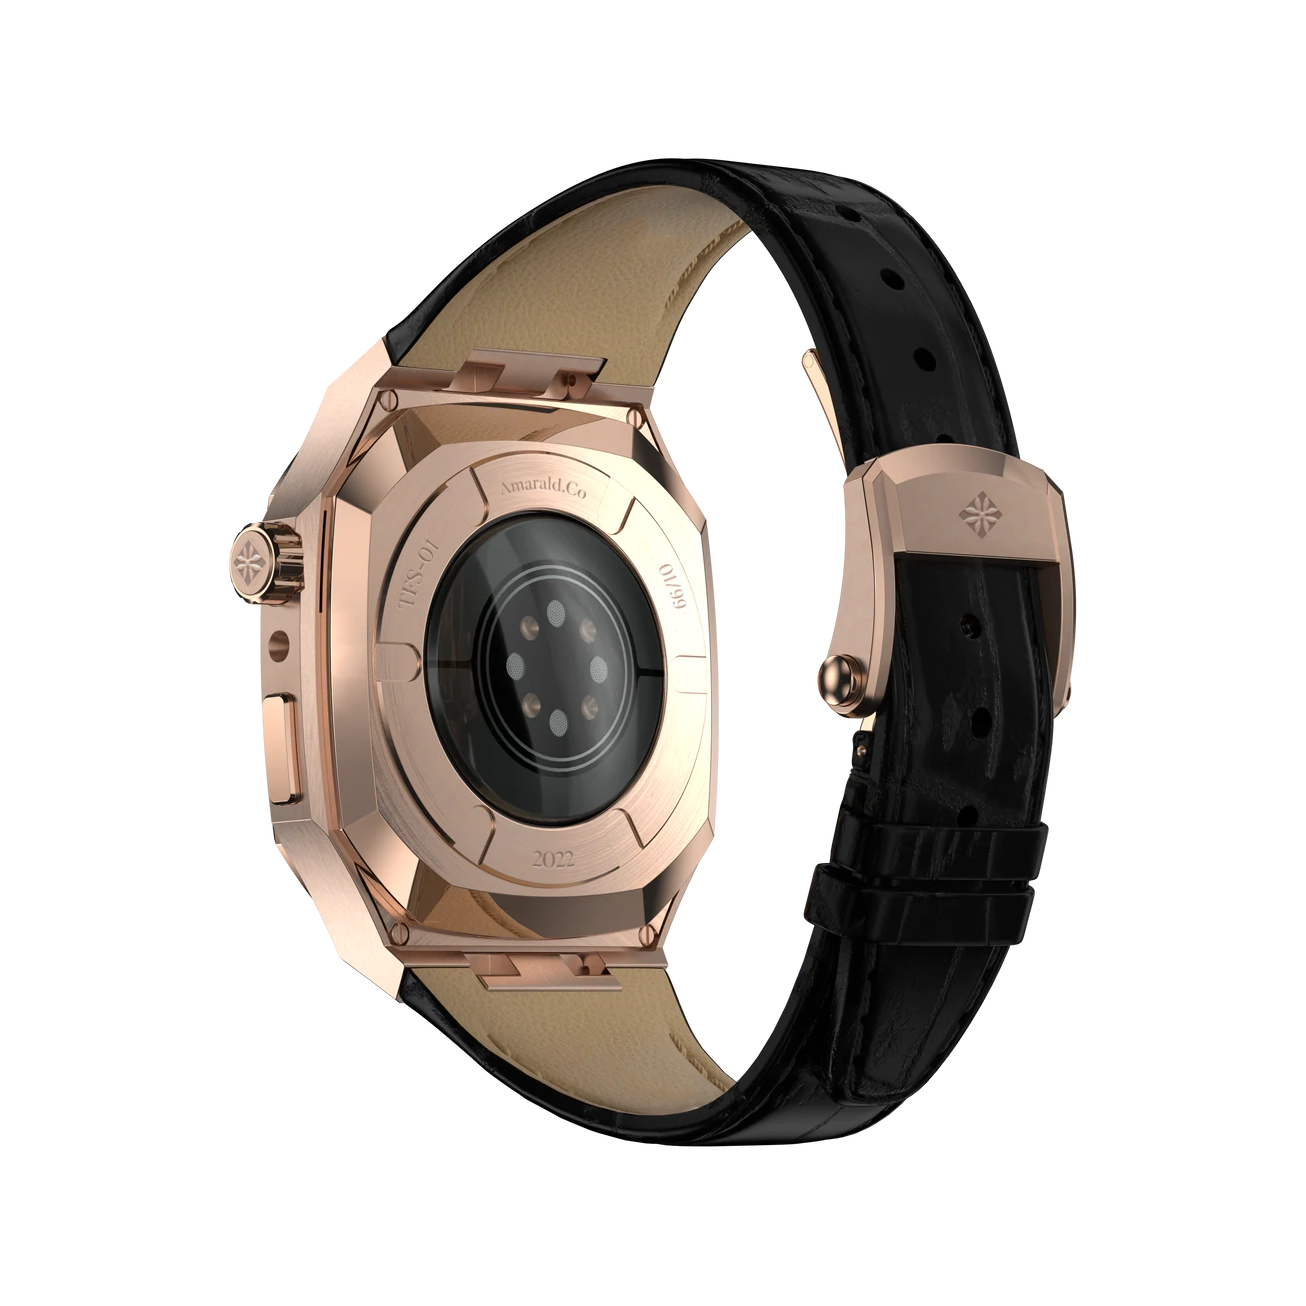 18k Rose Gold Stainless Steel Leather Classic